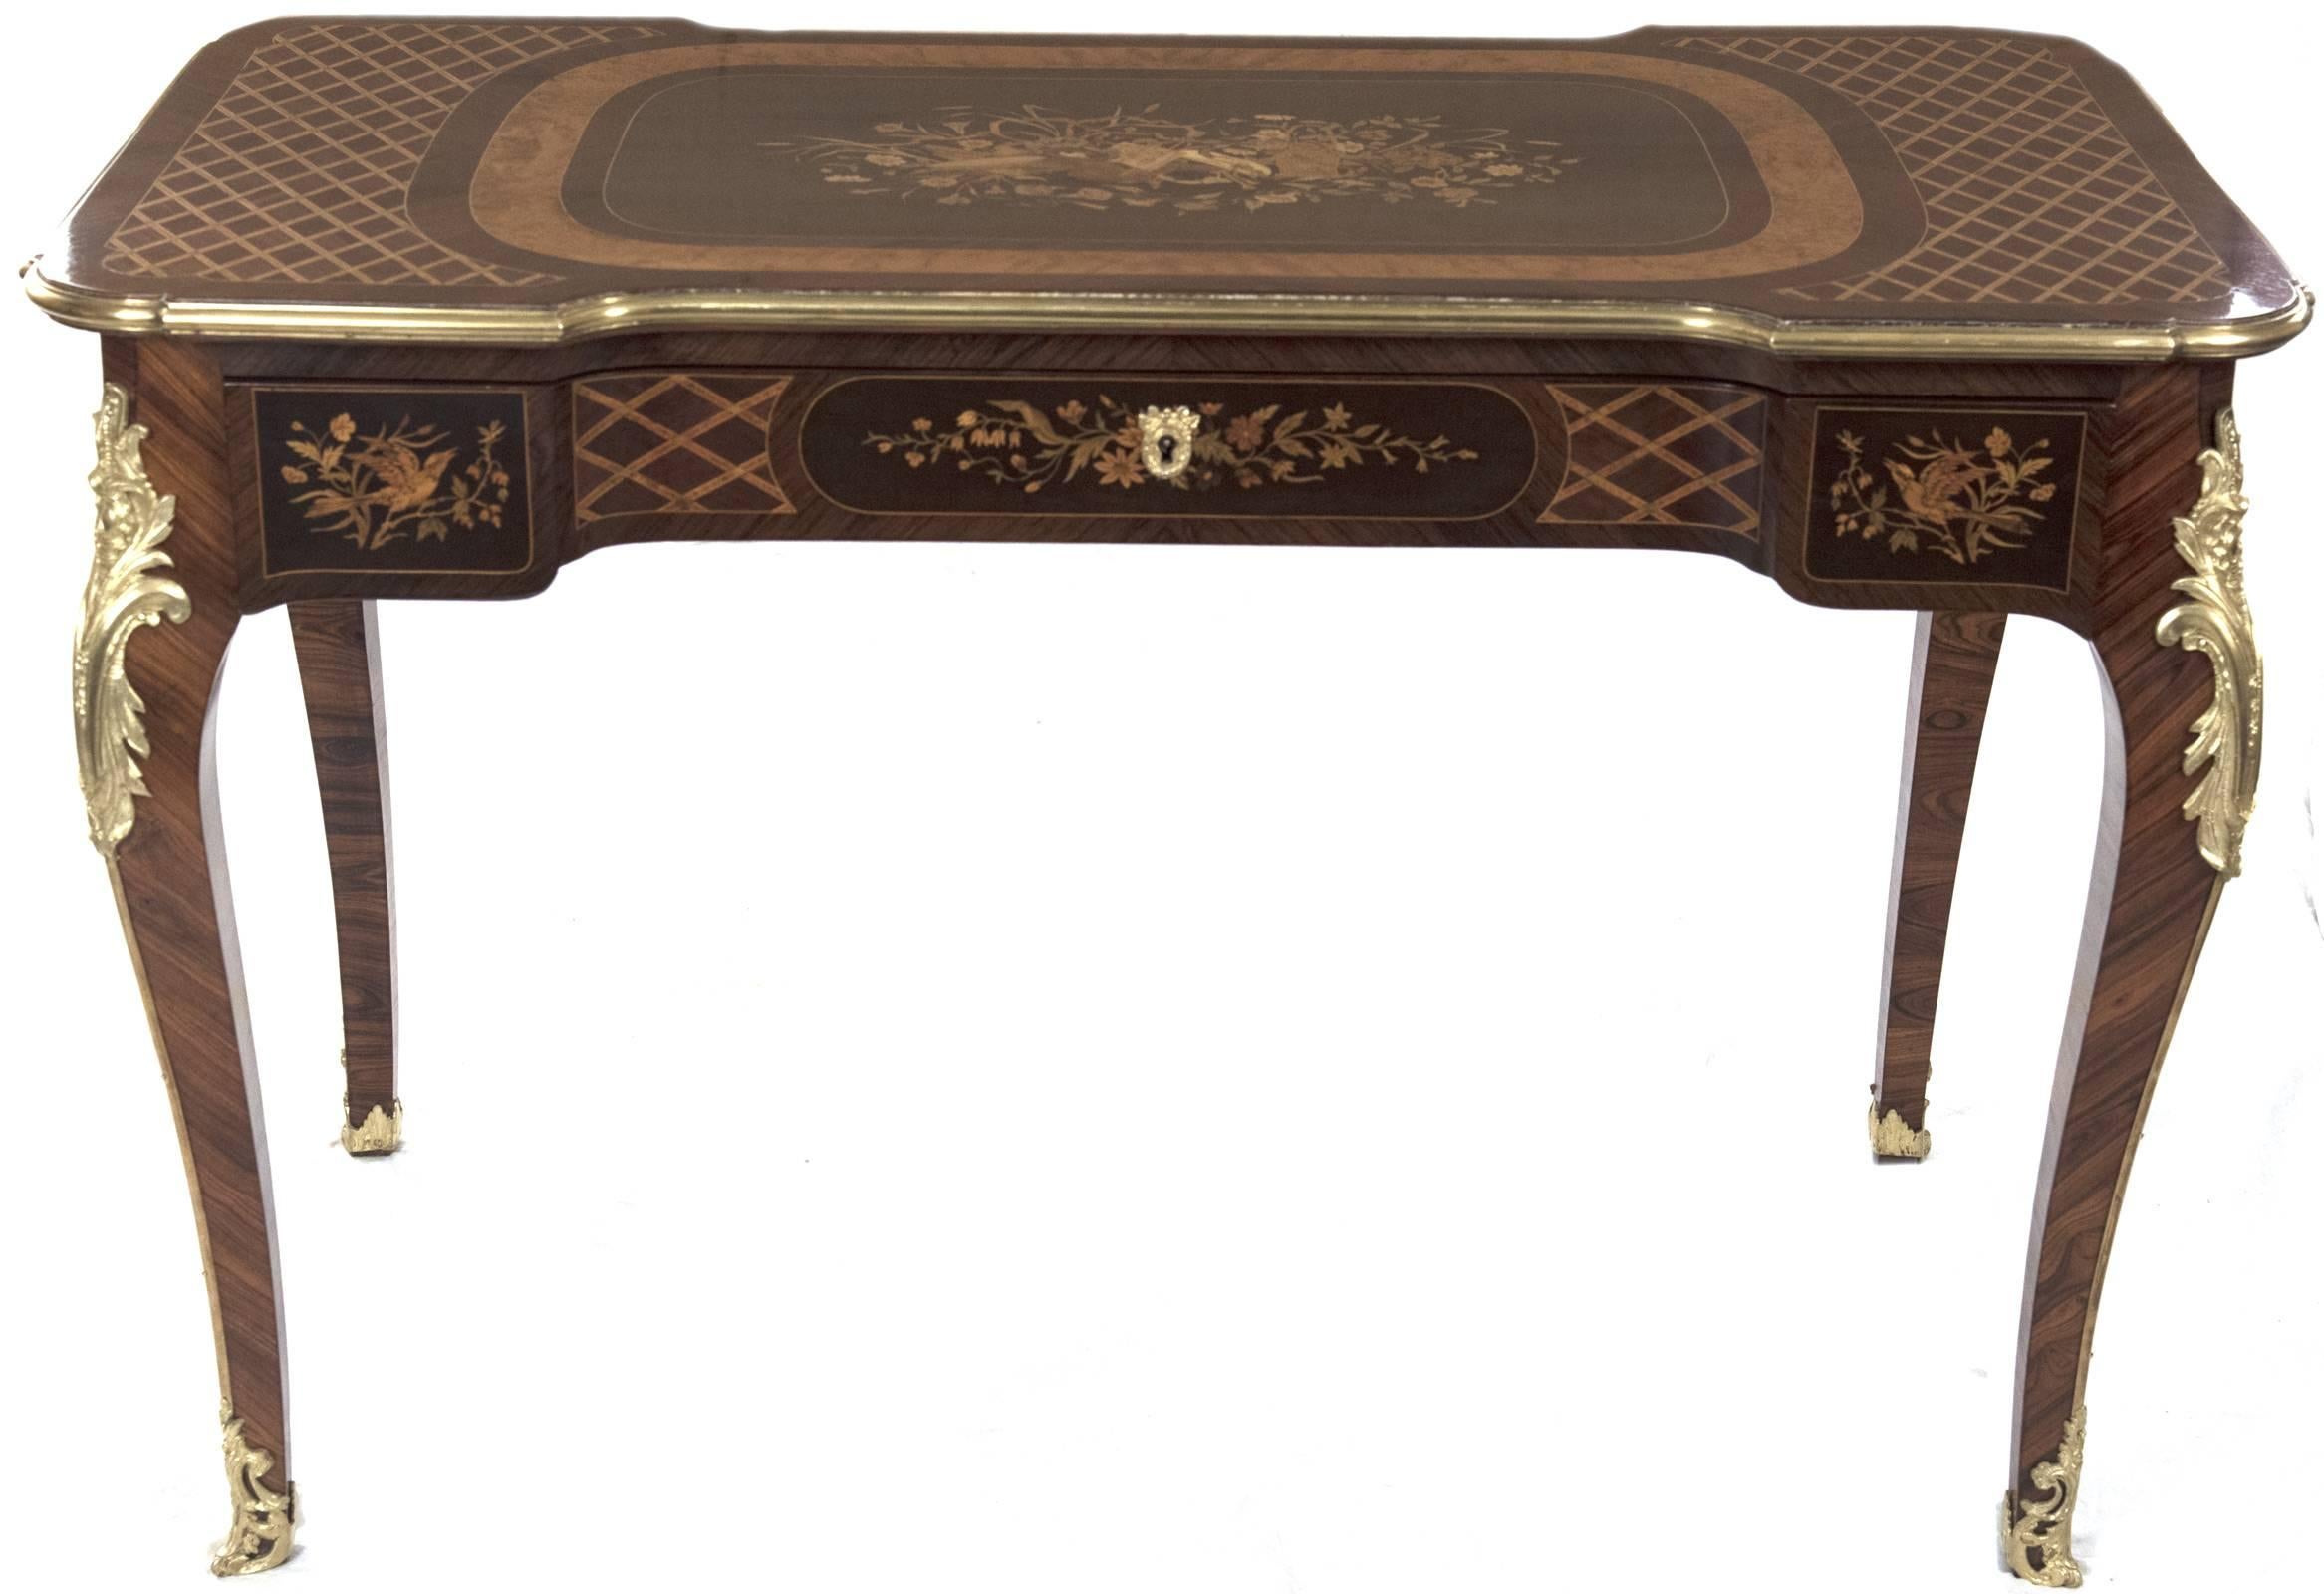 A handsome Louis XV style writing desk having a shaped top with a central ebonized ground inland with marquetry of musical instruments and scrolling florals surrounded by contrasting bands of inlay, which are flanked by trellis patterned marquetry